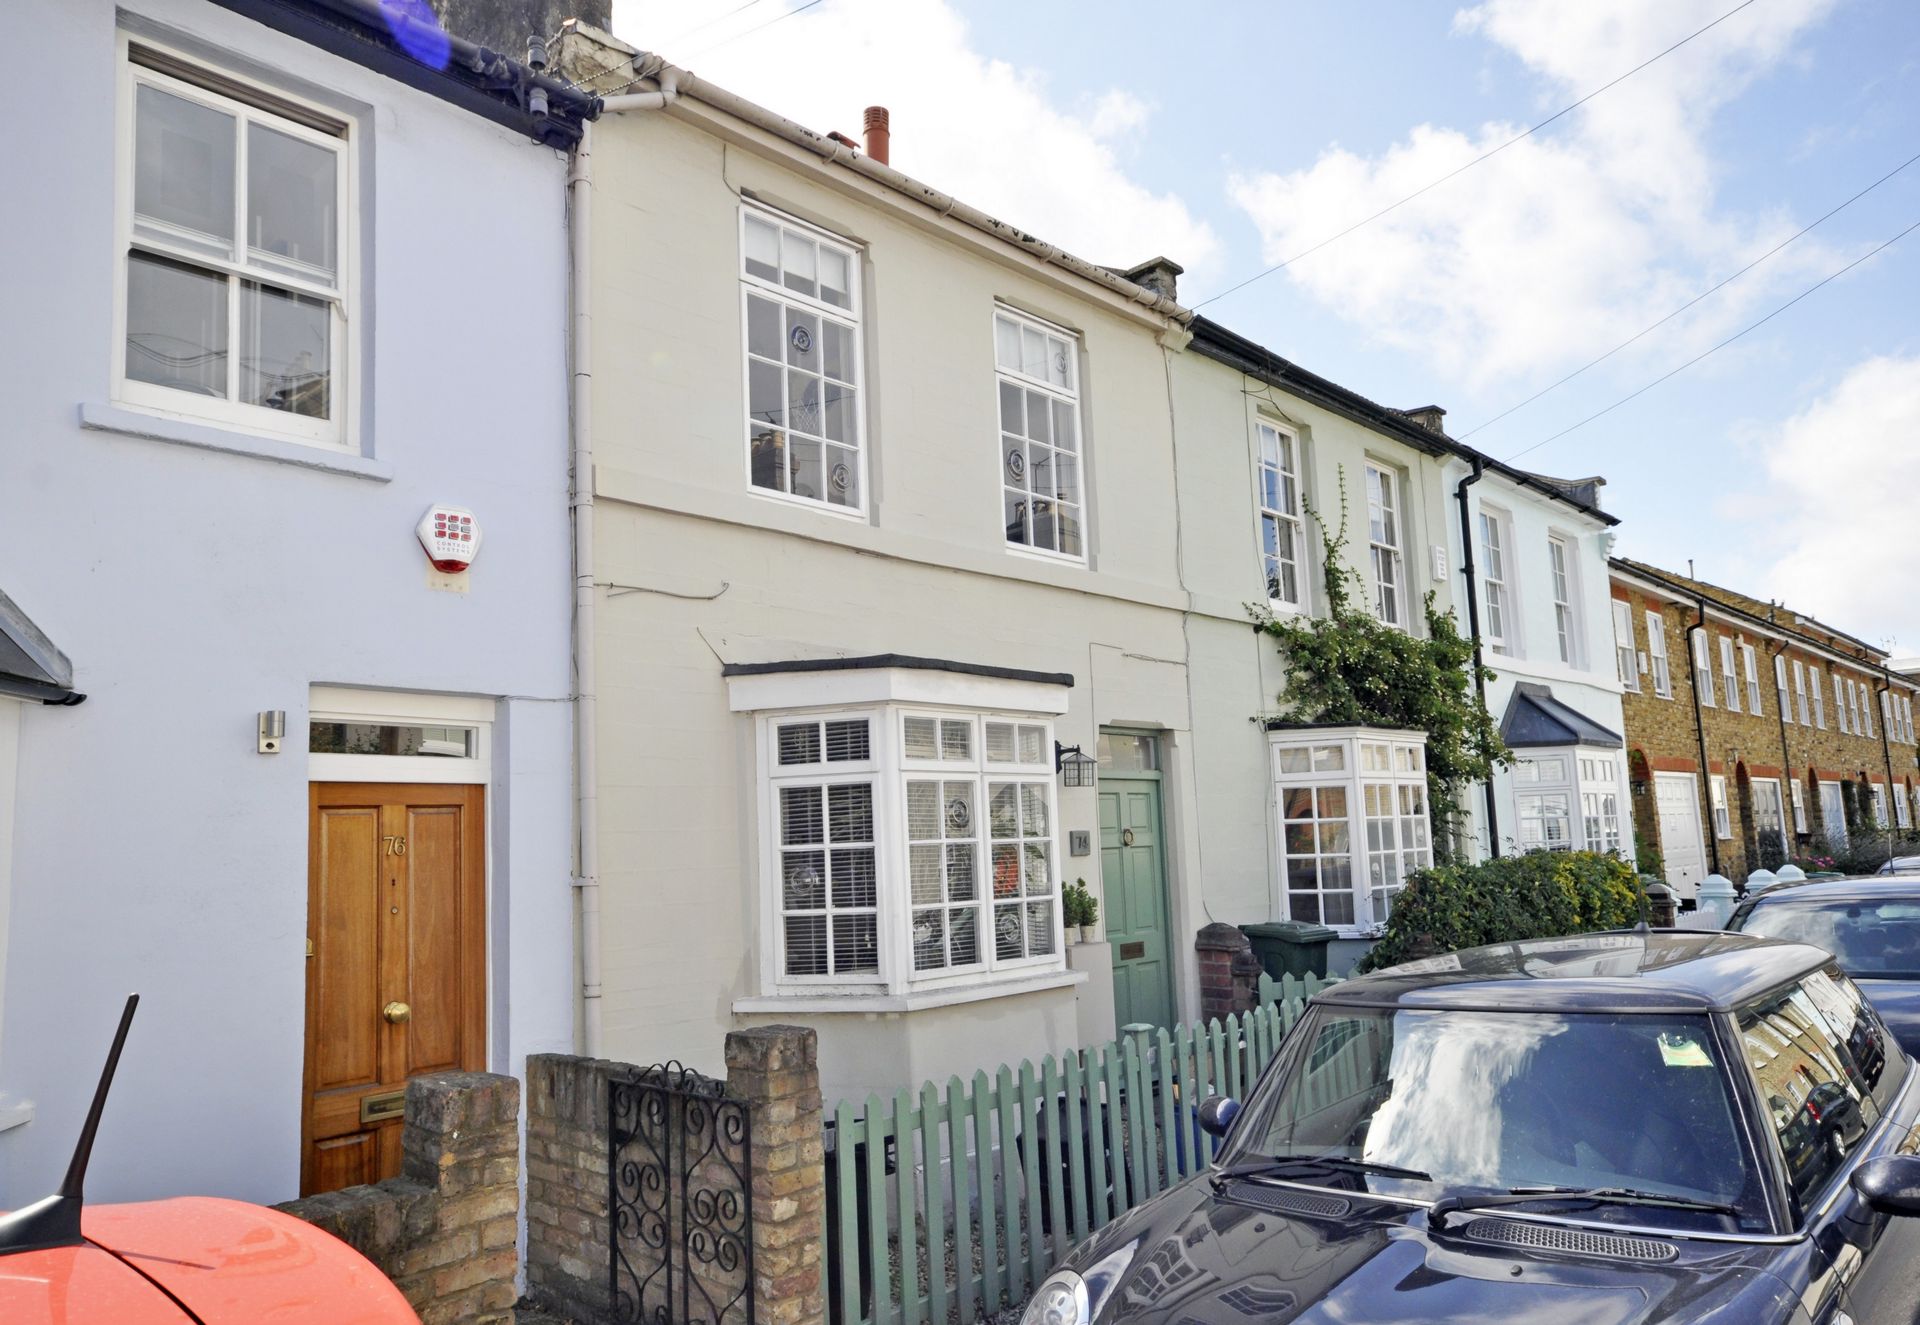 2 bedrooms house, 74 Archway Street Barnes London